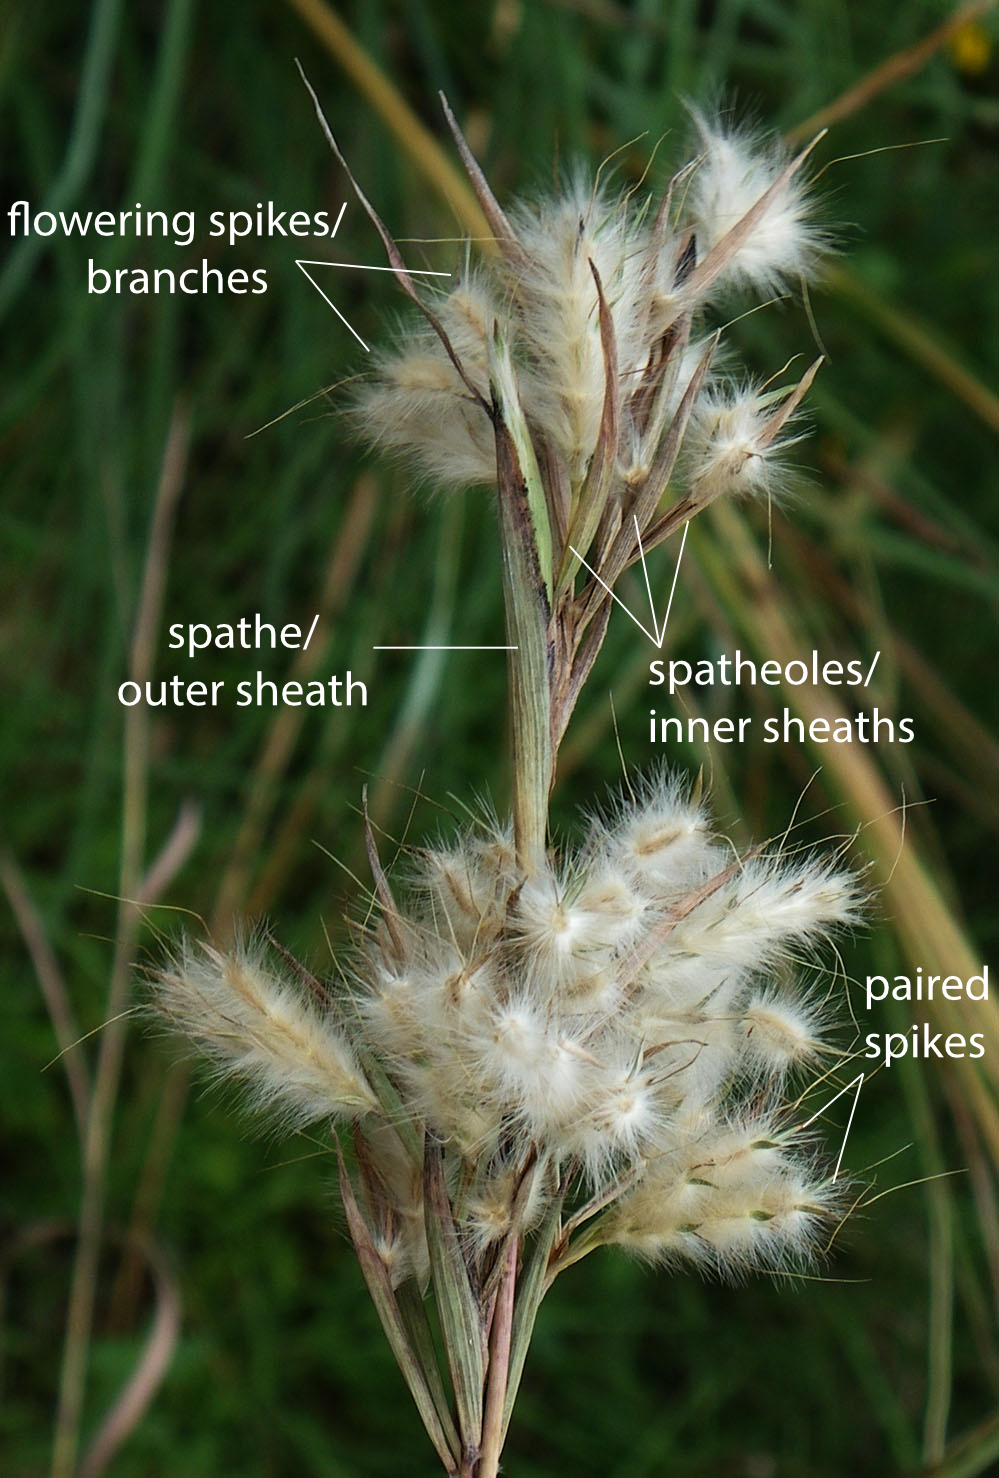 Fig. 2. Image of flower clusters of Cymbopogon bombycinus showing spathe and spatheoles (PHOTO: RJCumming d49474a).